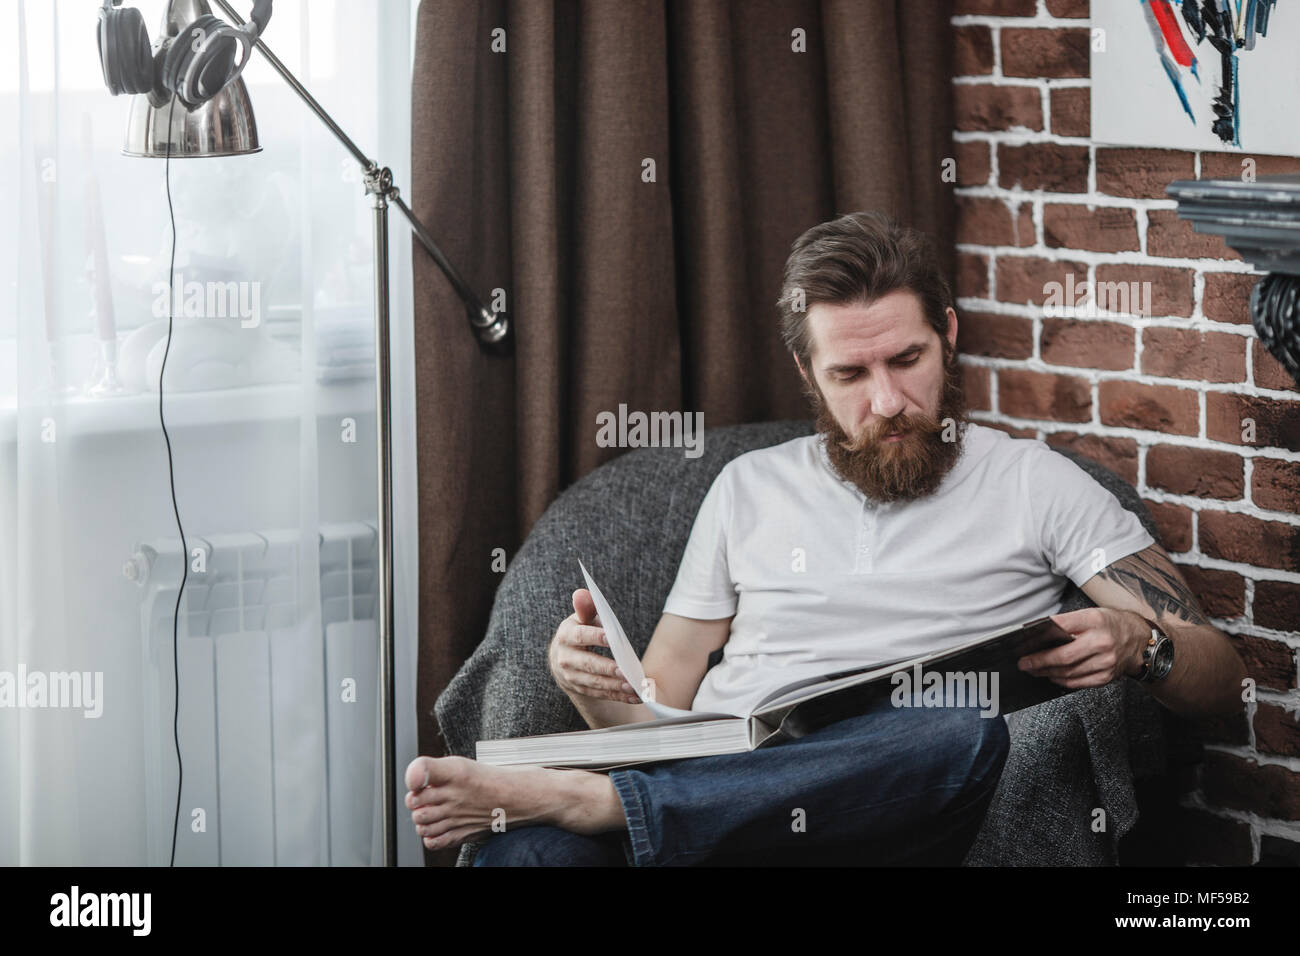 Man sitting on armchair looking at coffee-table book Stock Photo